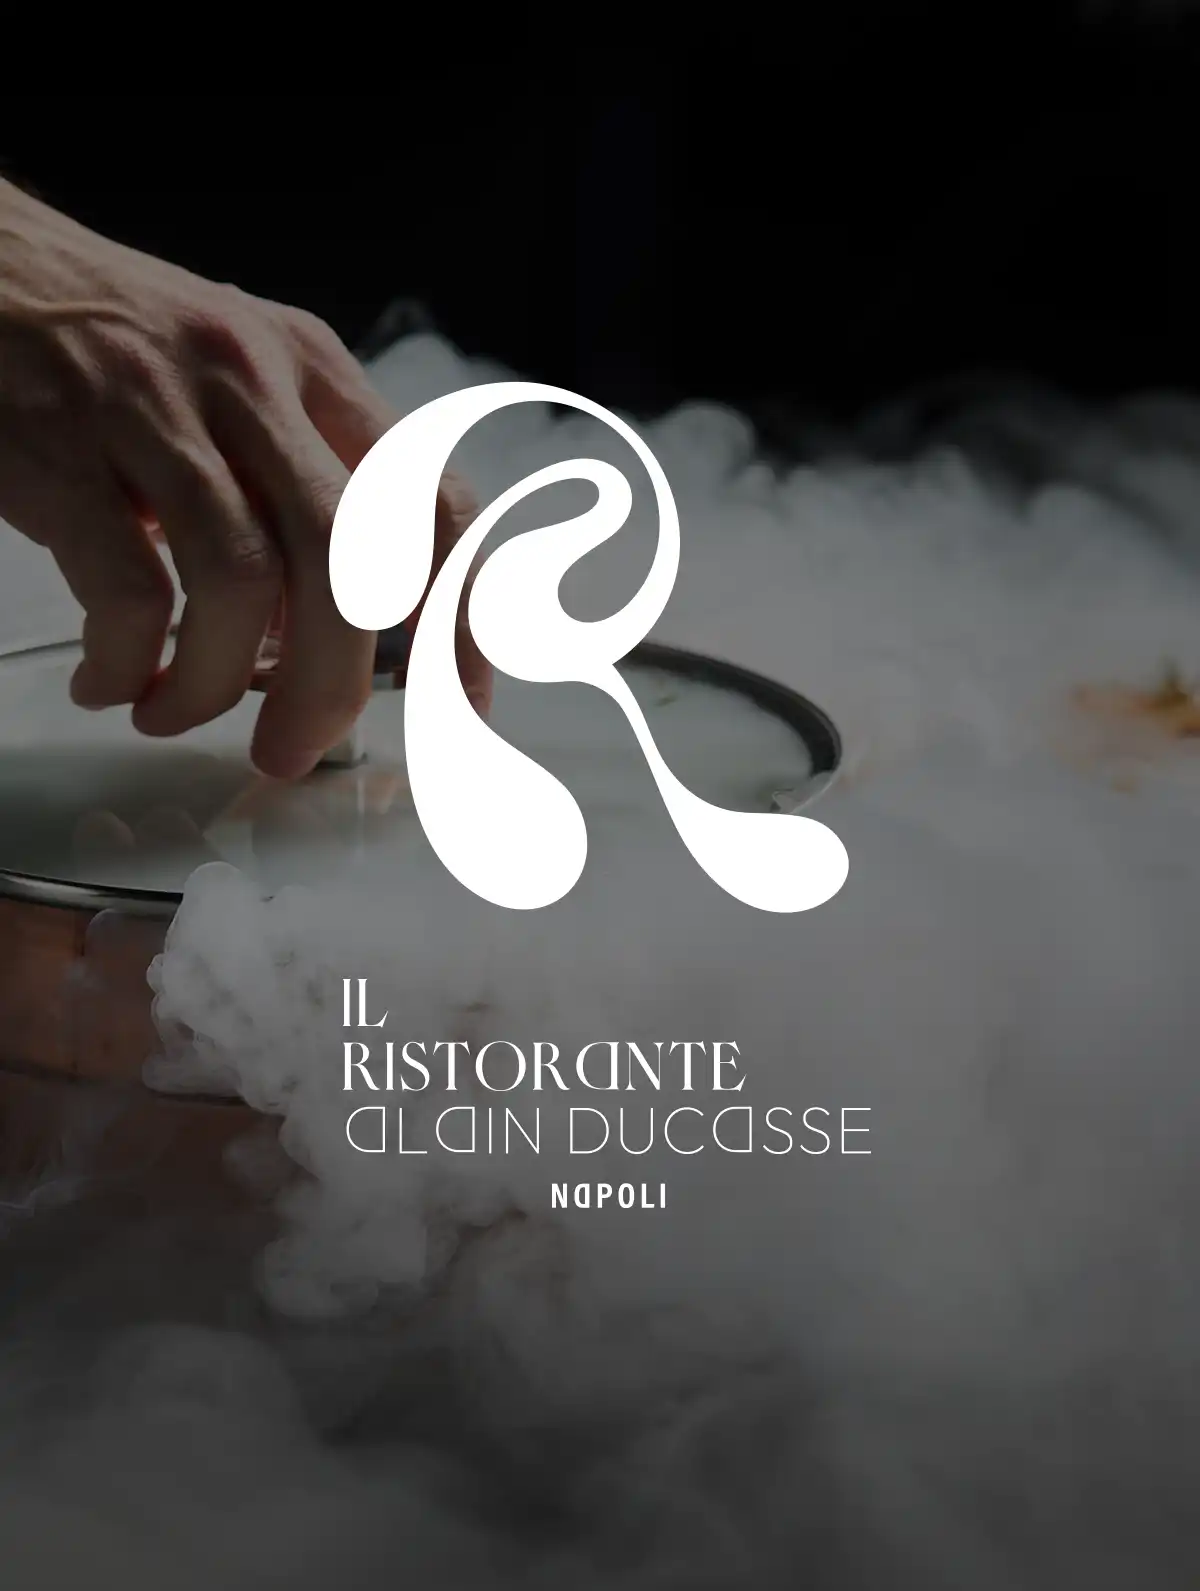 Romeo - Alain Ducasse at ROMEO Napoli: the theatre of emotion - By HDG